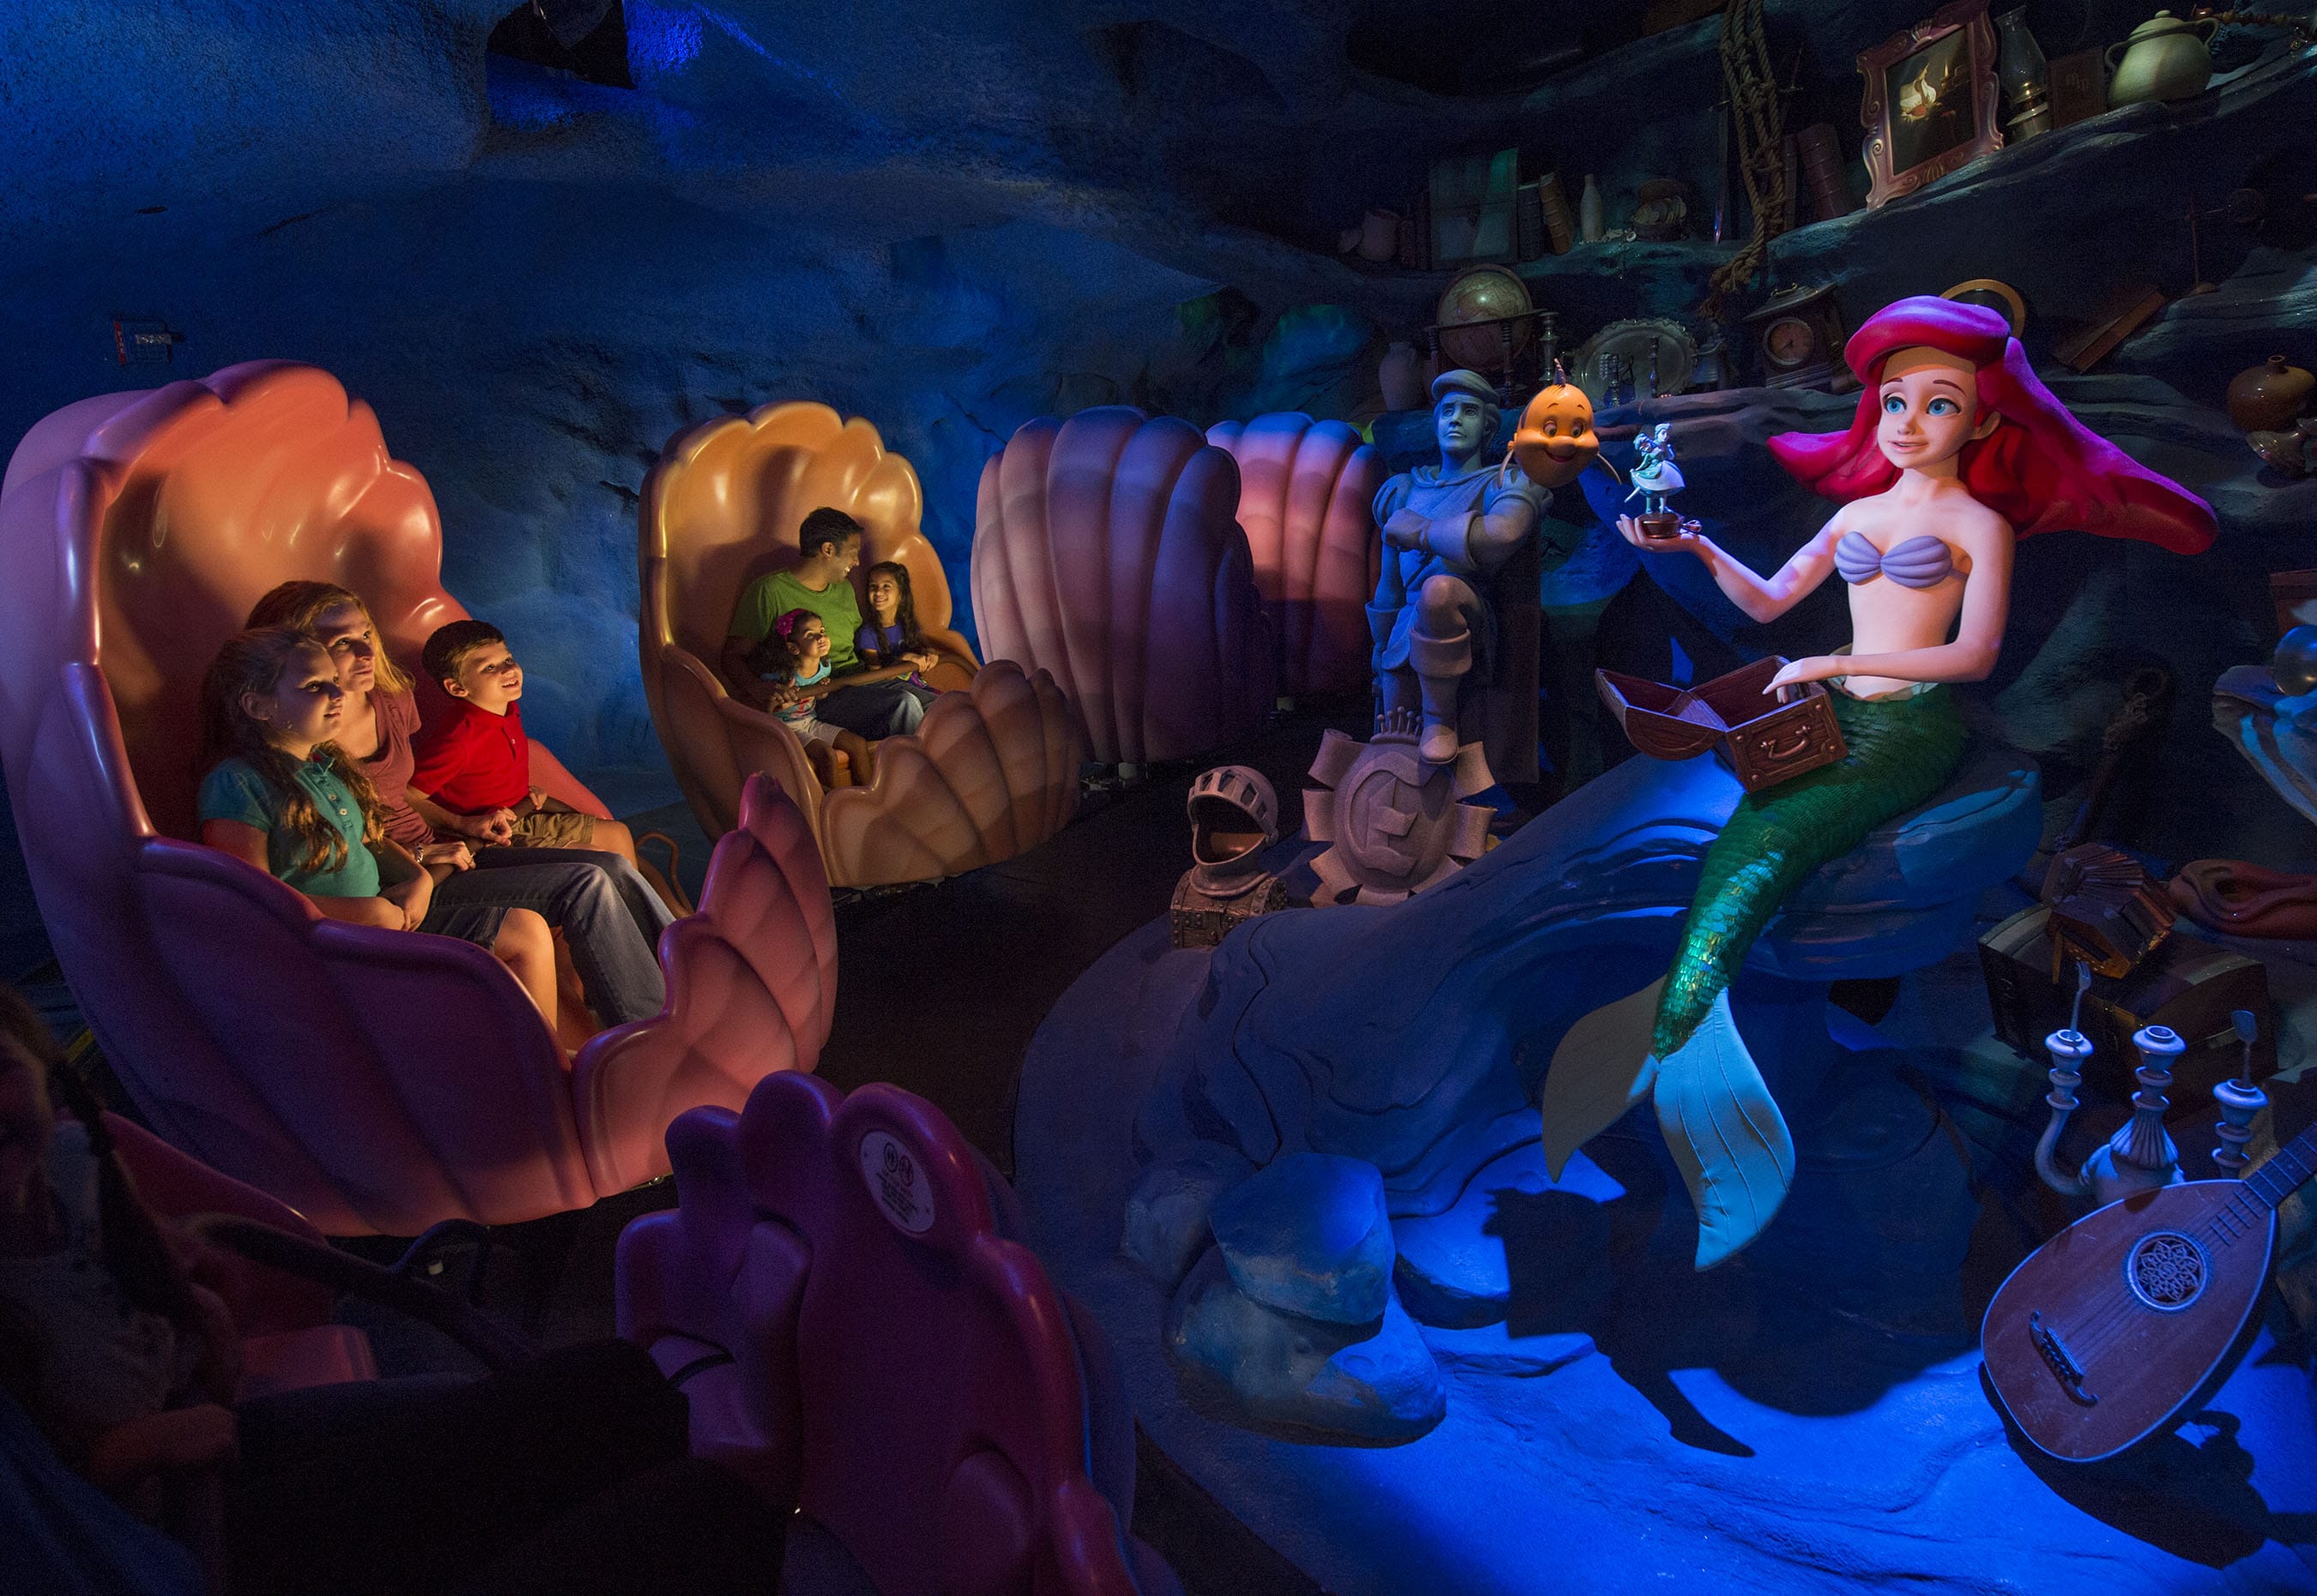 Under the Sea - Voyage of the Little Mermaid at Magic Kingdom